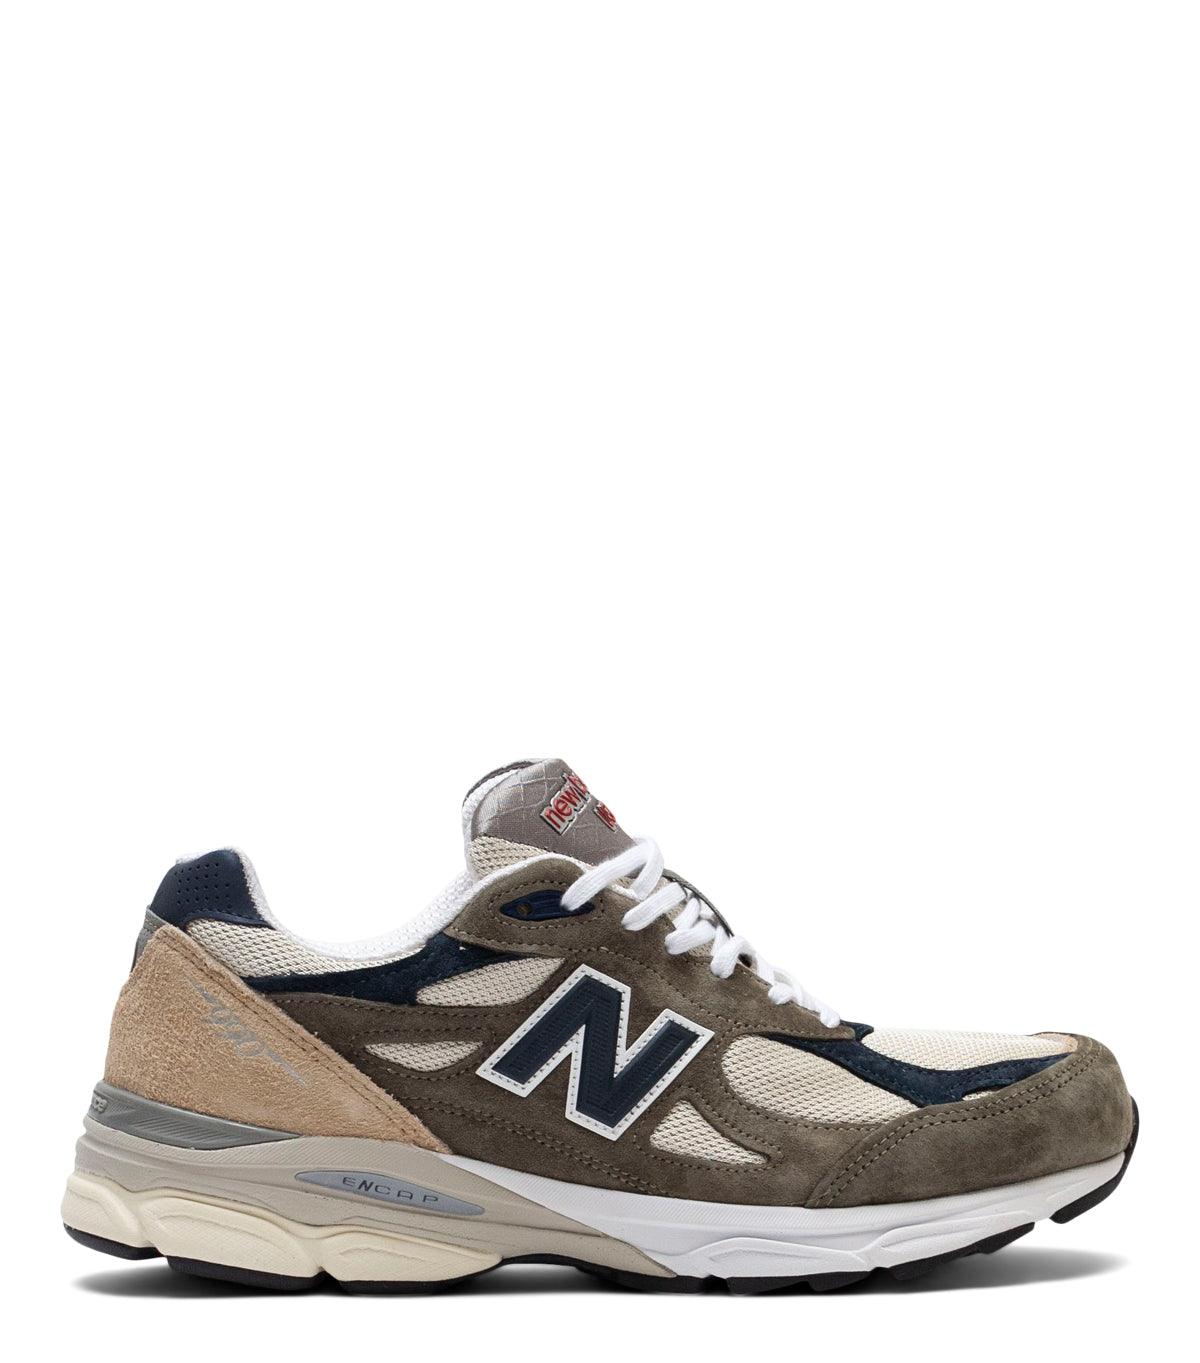 10.27.22 New Balance by Teddy Santis Made in USA 990v3 Olive